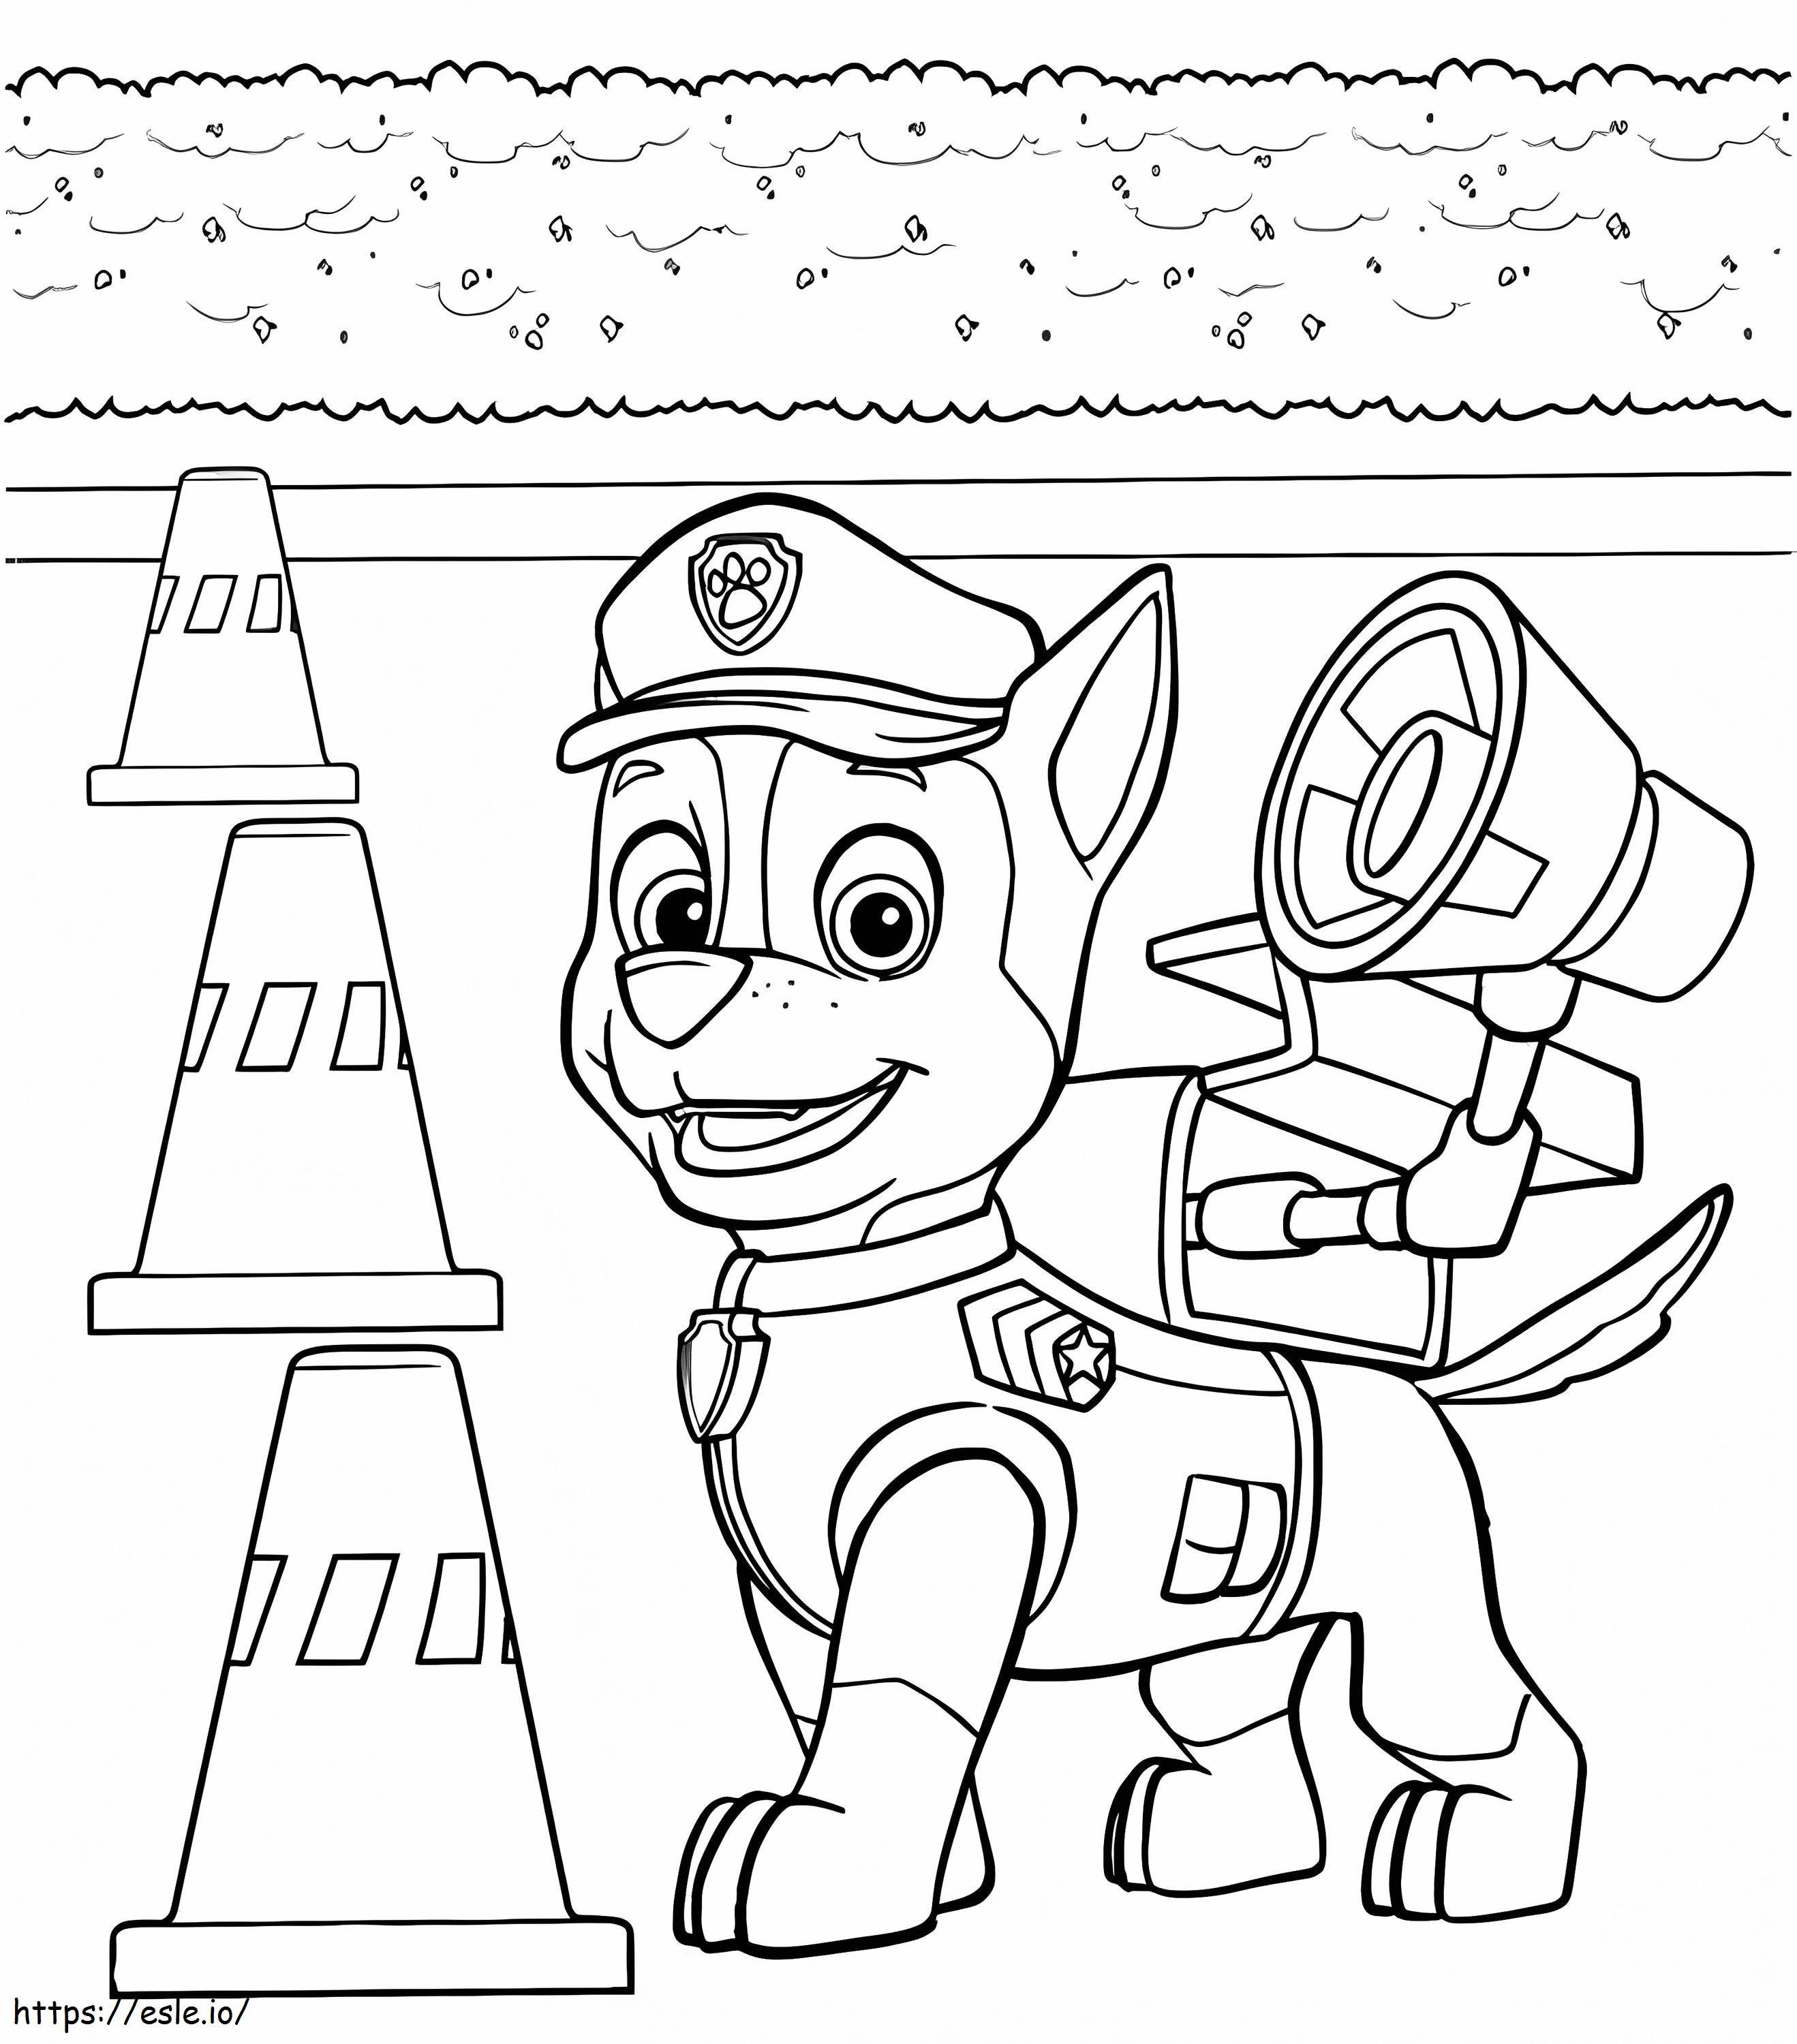 Chase Paw Patrol 6 coloring page